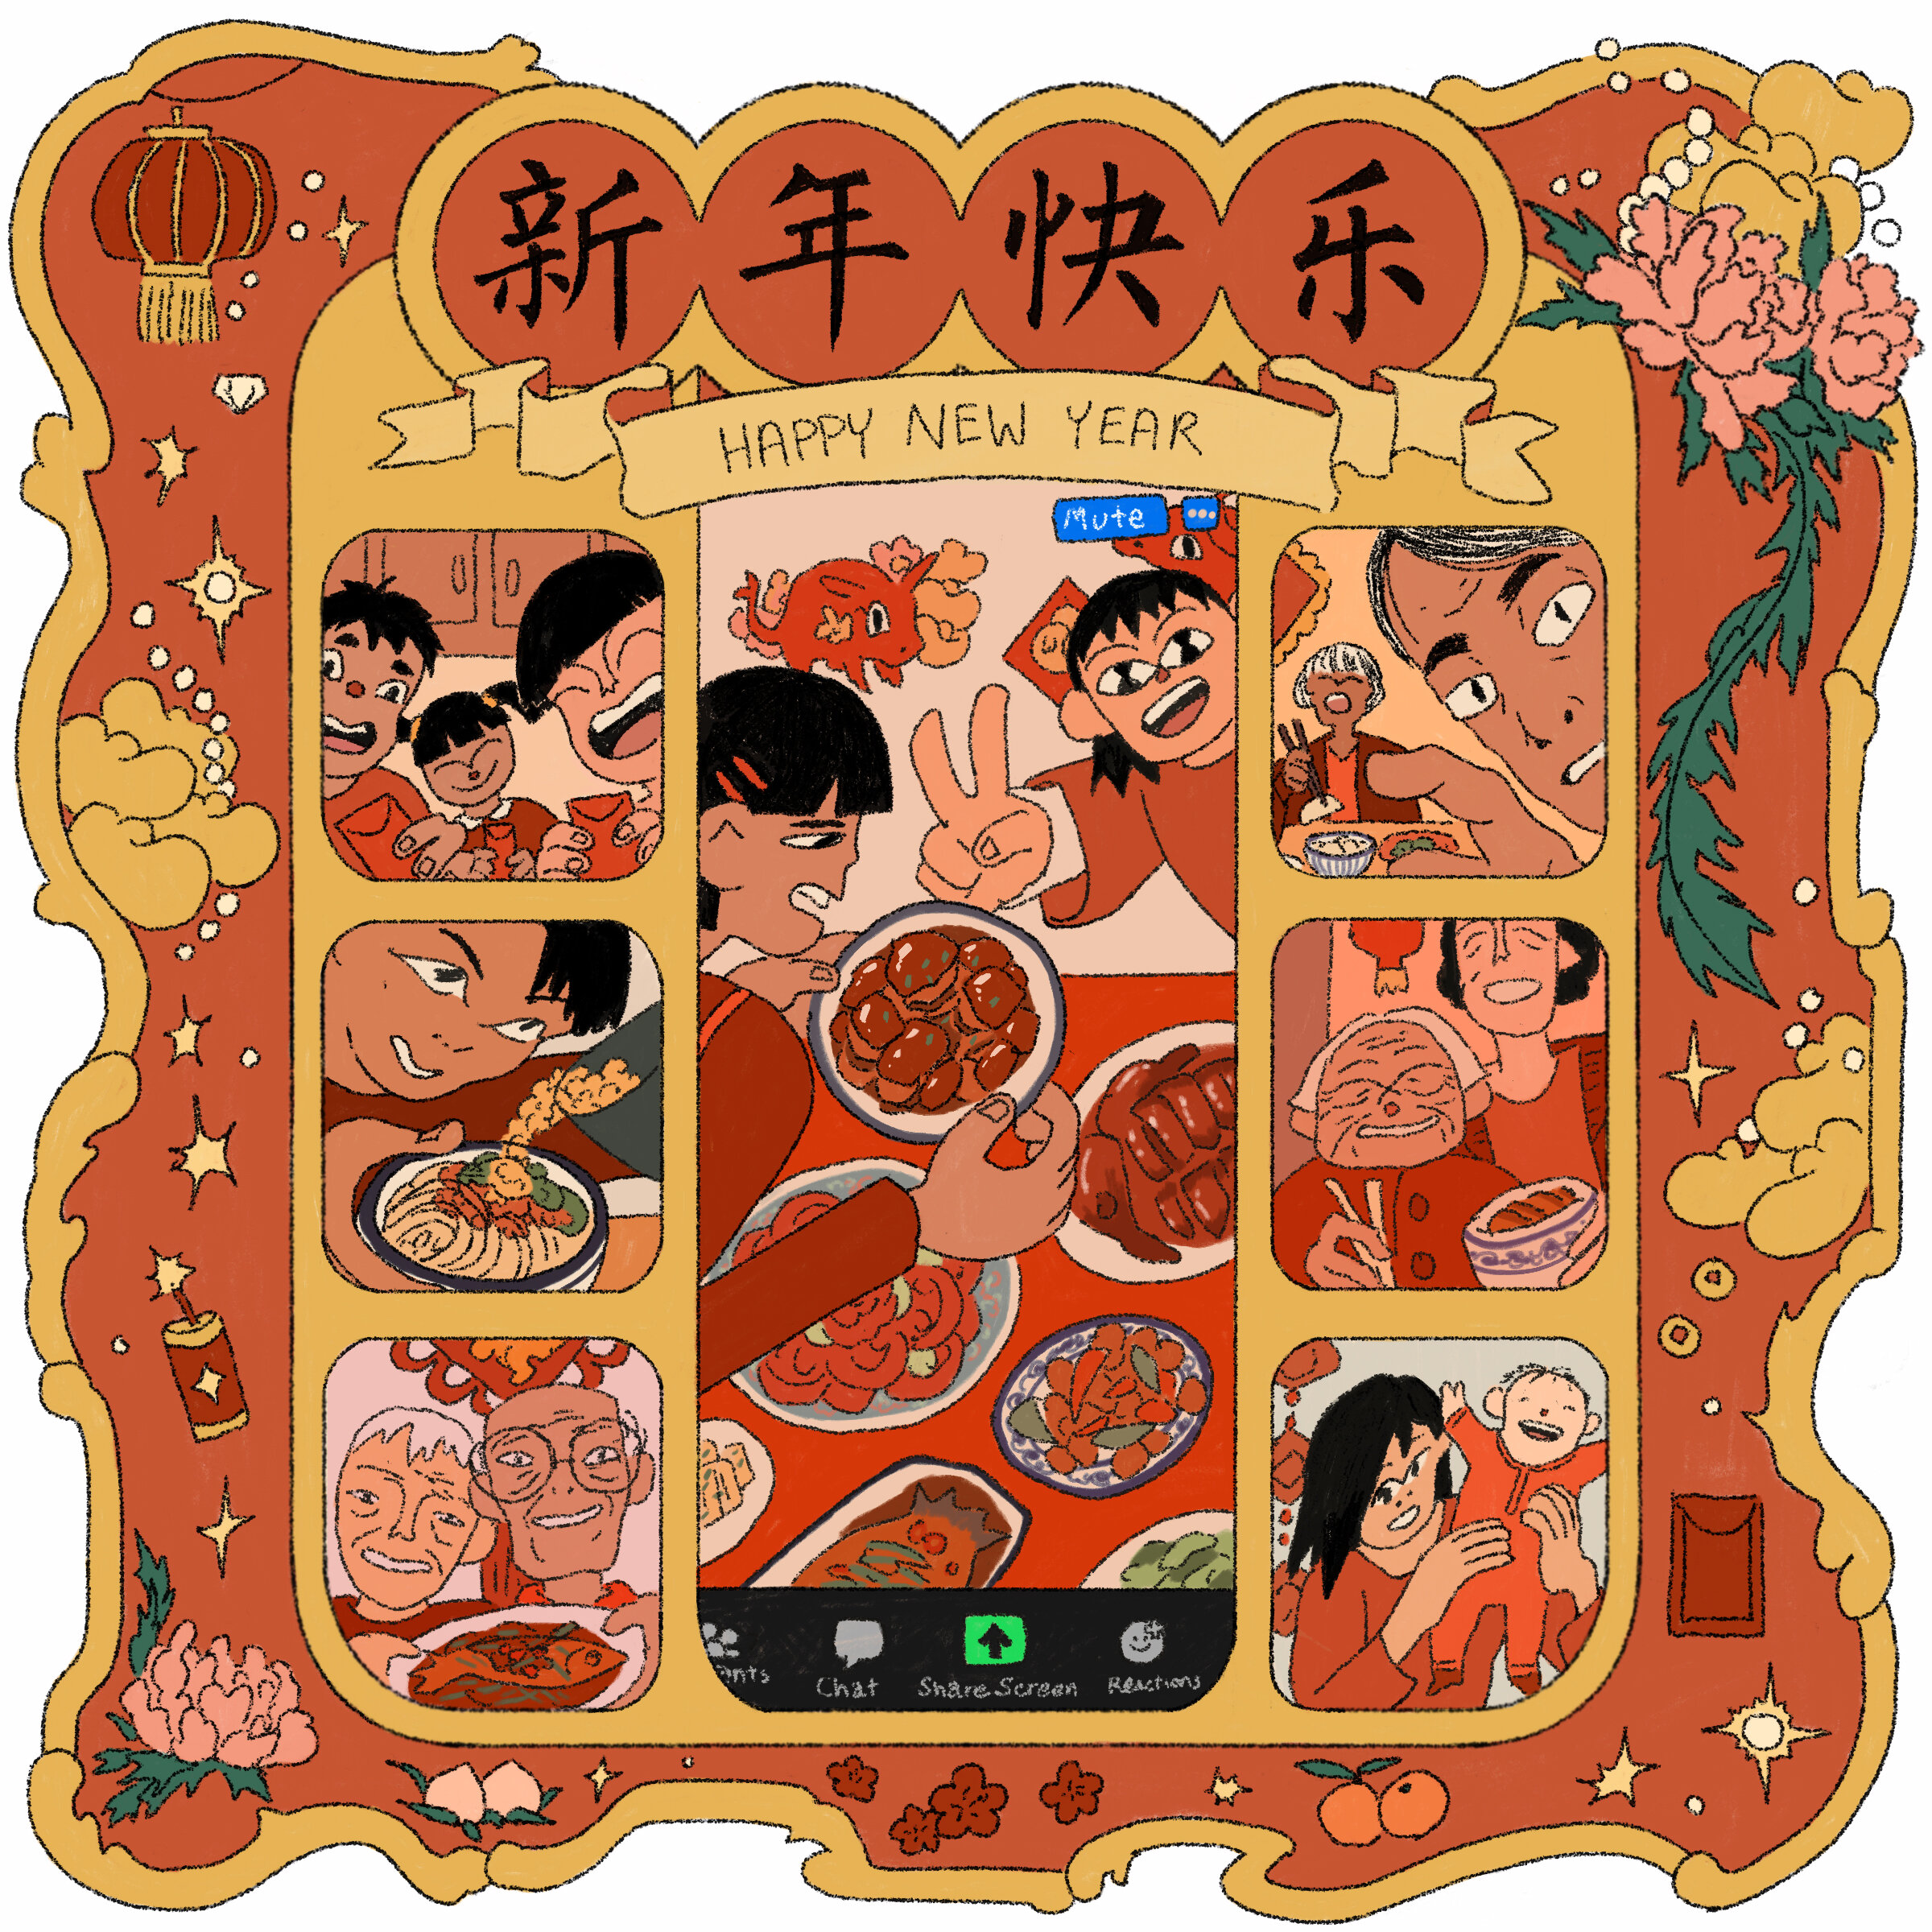 Illustrations and story for Grub Street from New York Magazine about my Lunar New Year dinner 2021